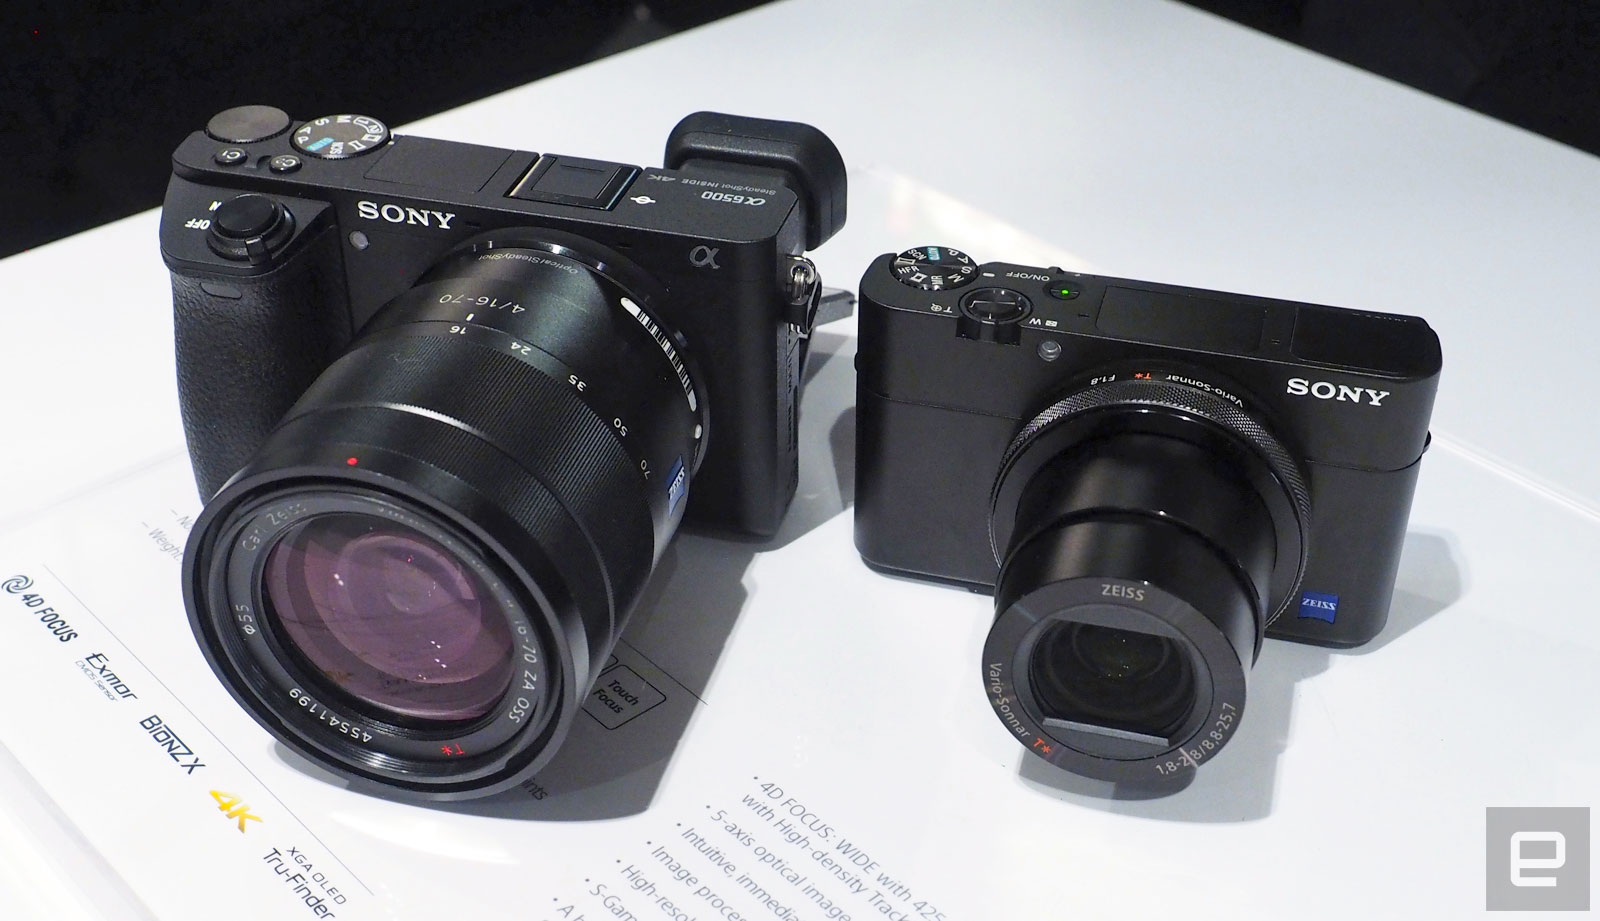 Sony's new A6500 and RX100 V cameras are all about speed